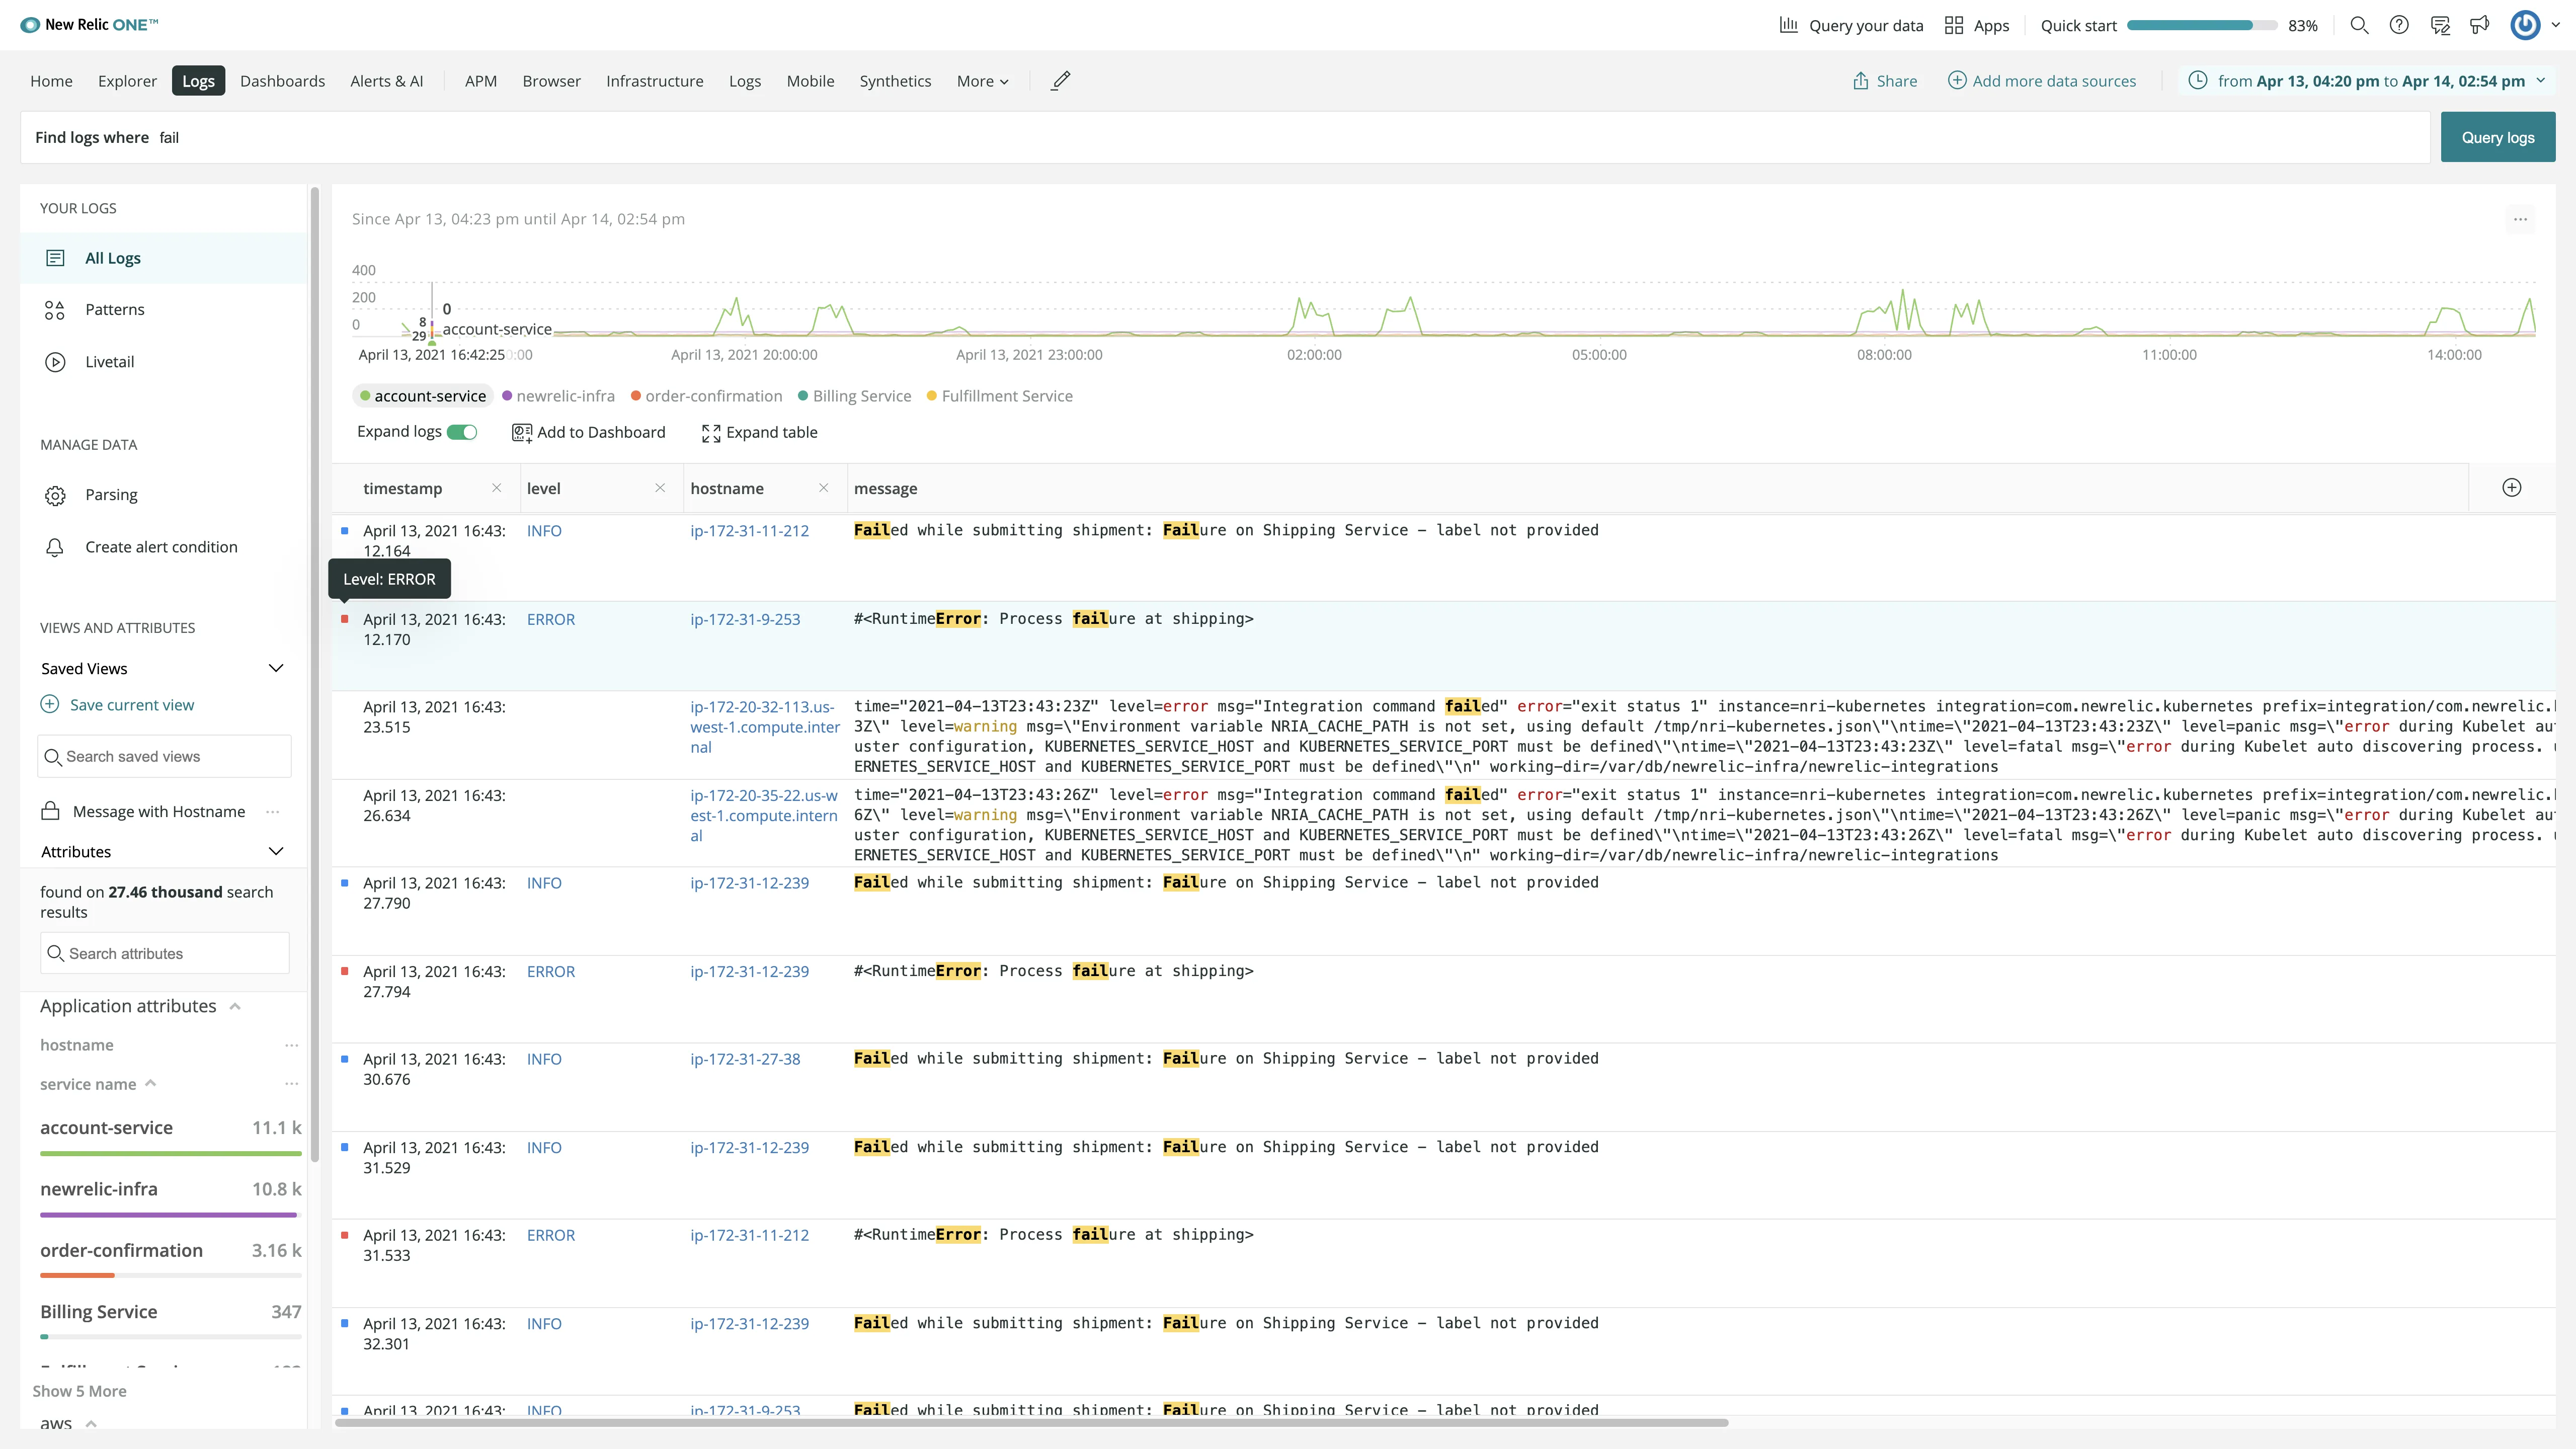 Log Management dashboard in New Relic